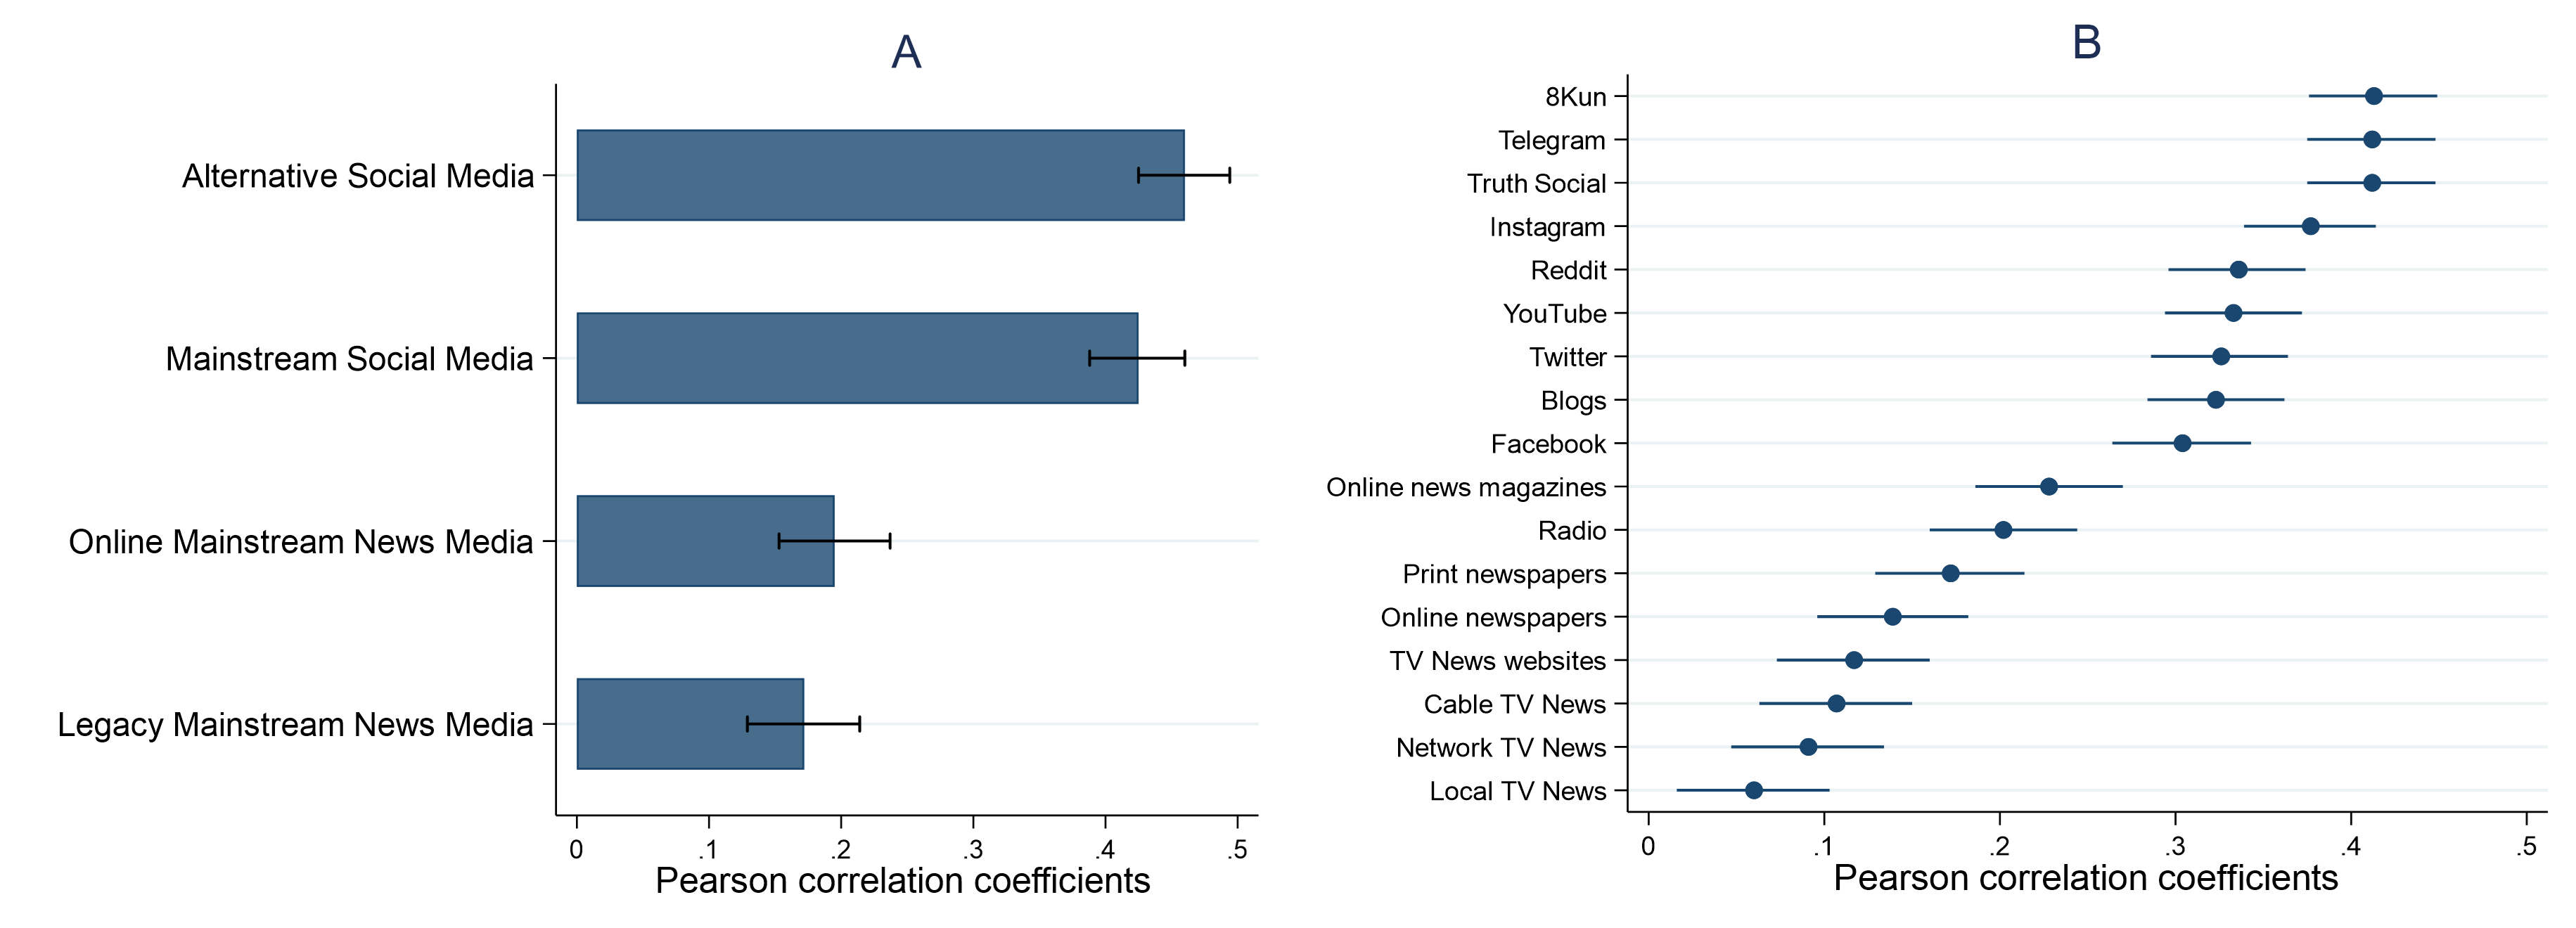 Who knowingly shares false political information online?